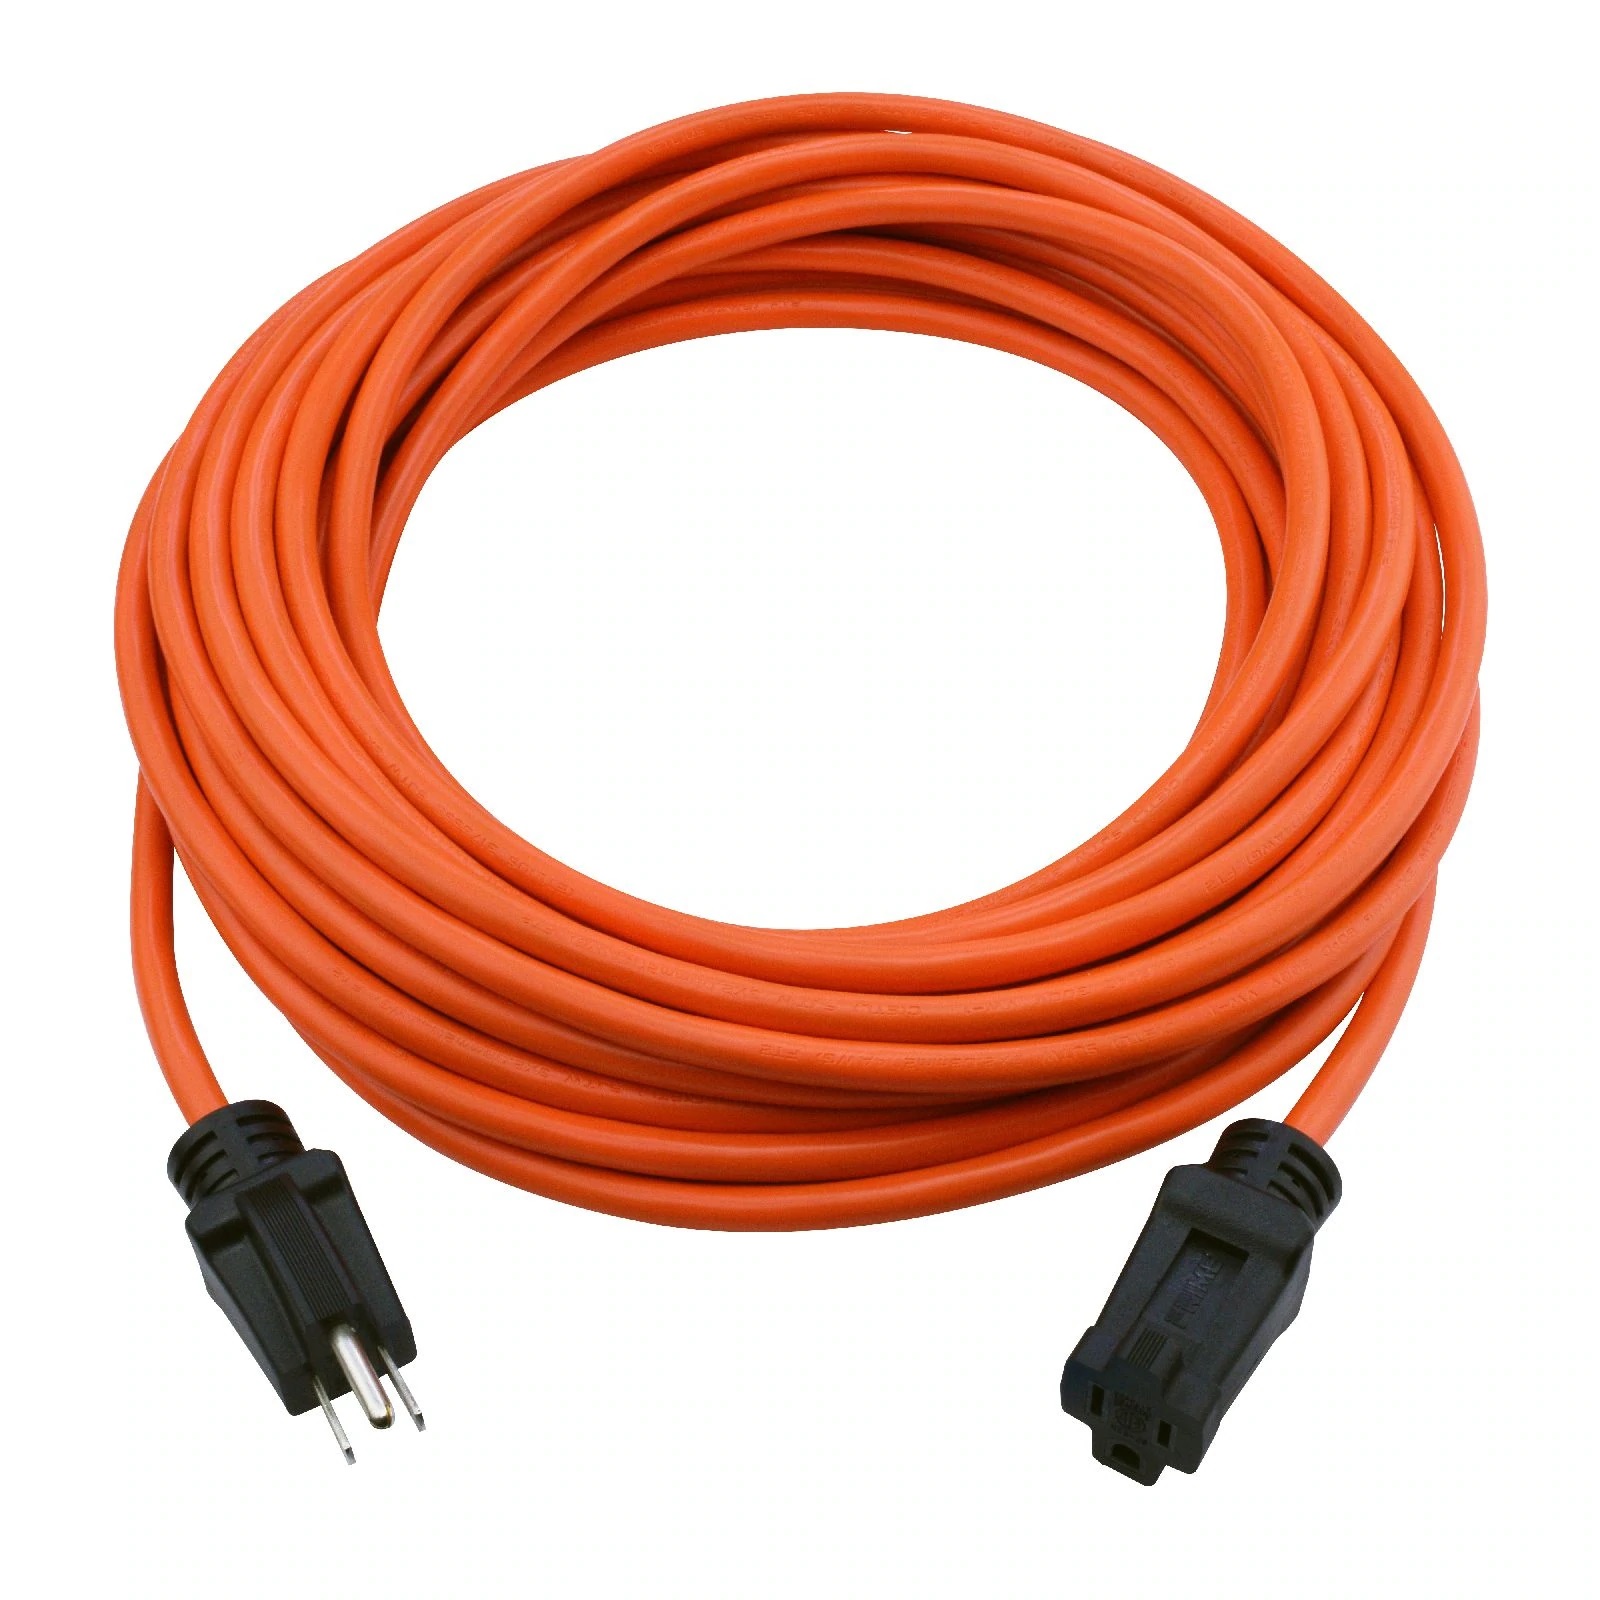 Prime Wire & Cable 50 Foot 14/3 SJTW Outdoor Extension Cord from GME Supply